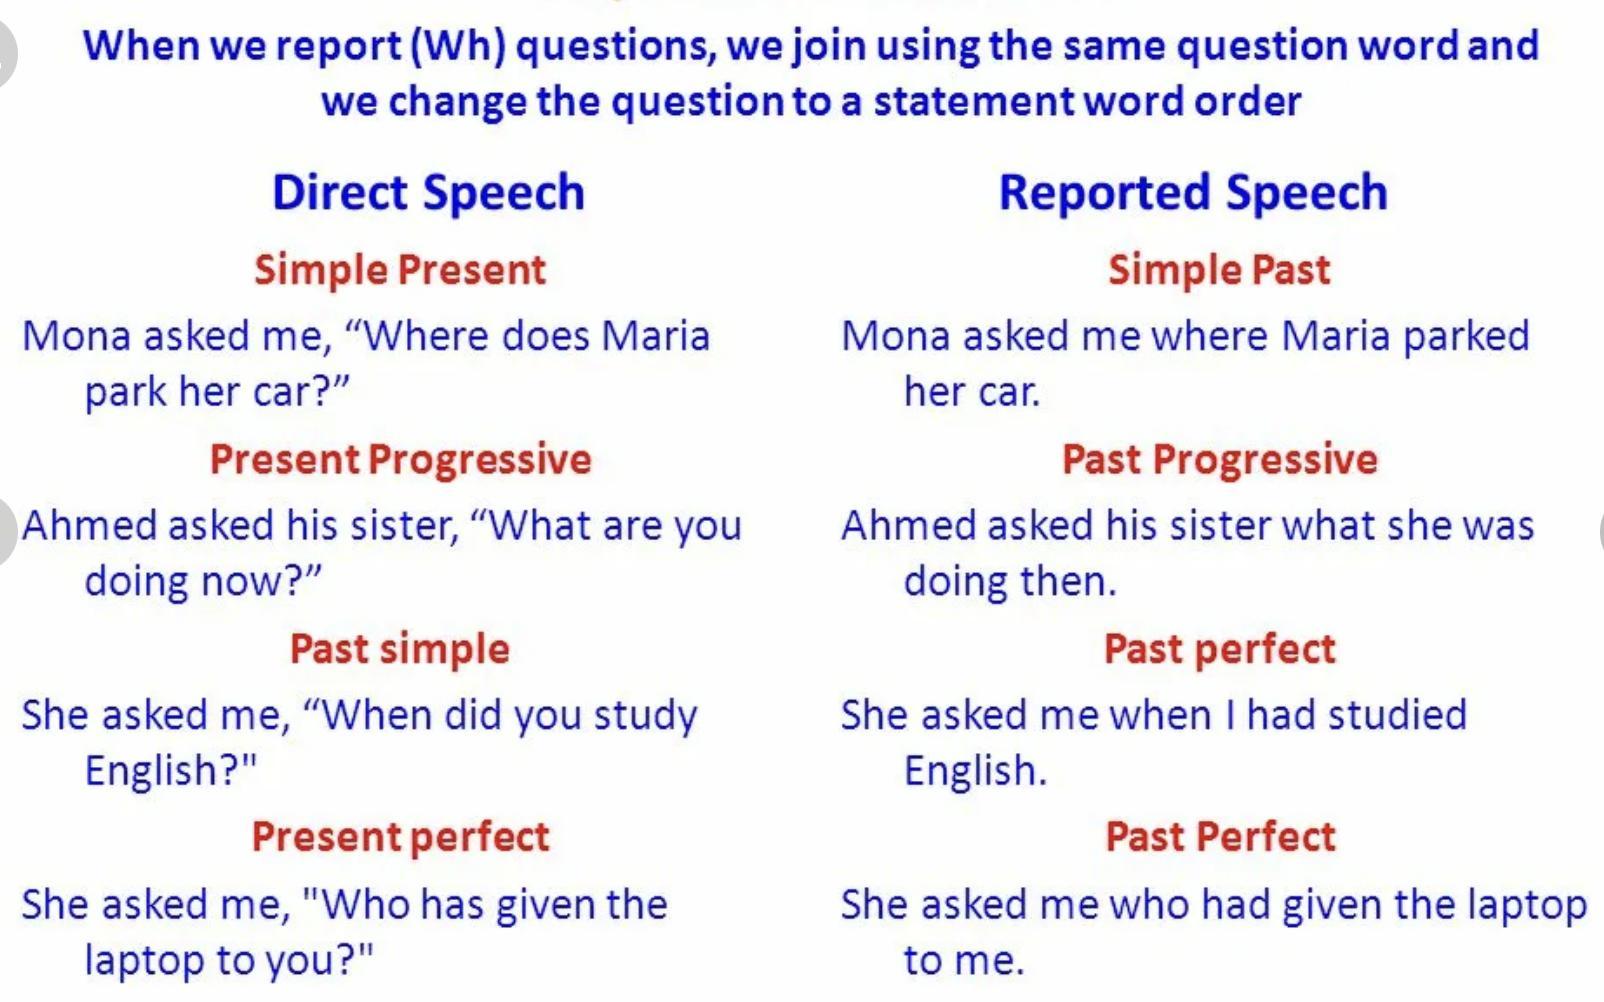 He asked me where i had been. Reported Speech questions таблица. Direct Speech reported Speech questions. WH questions in reported Speech. Reported Special Speech вопросы.